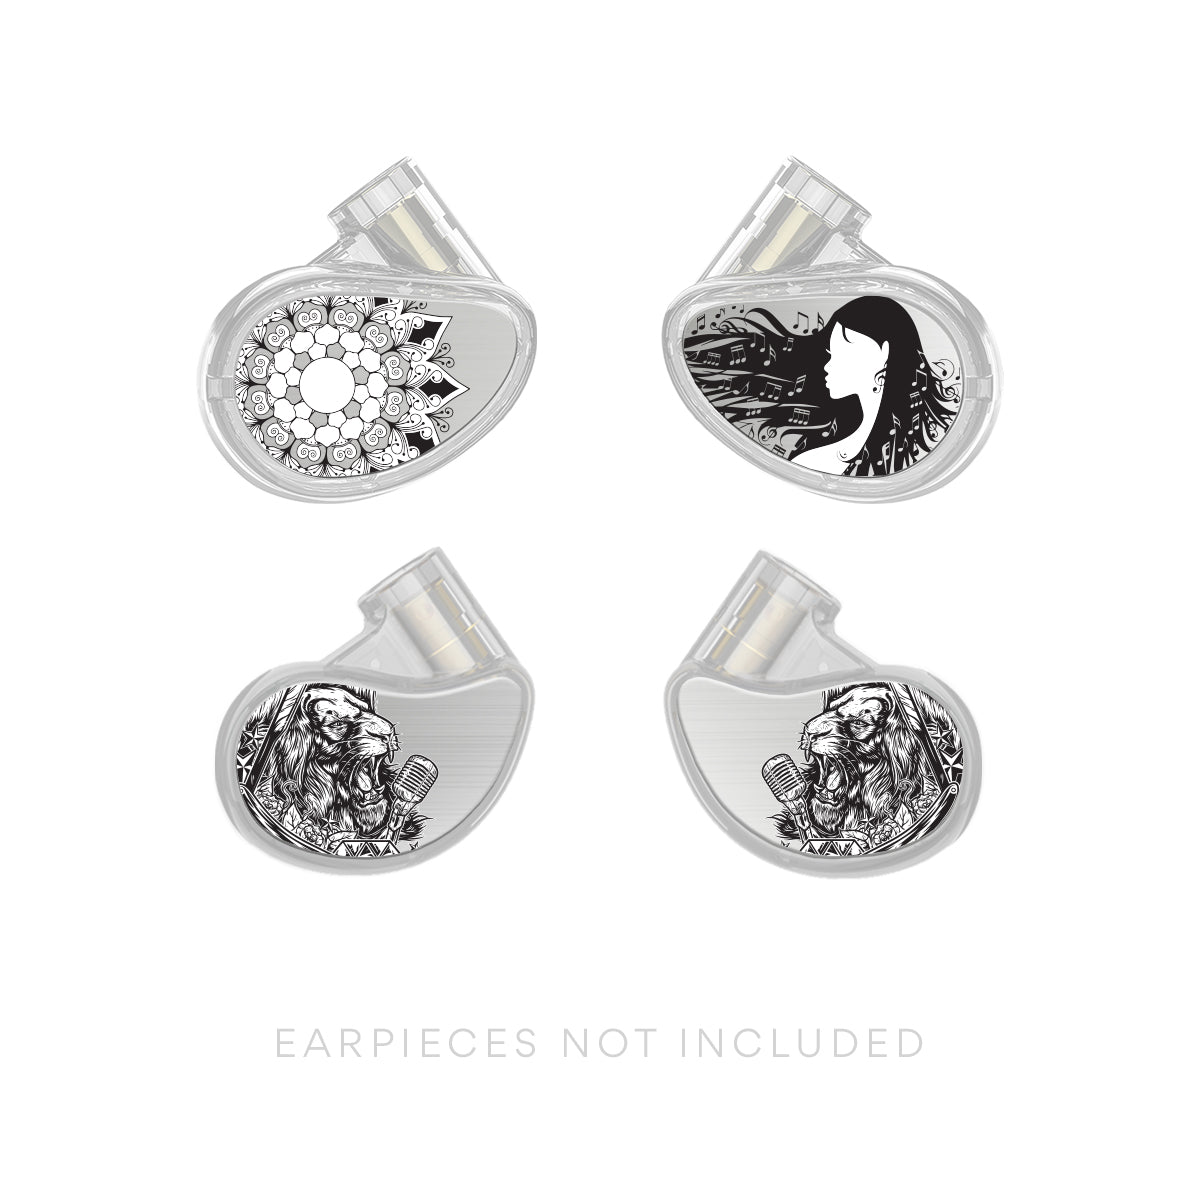 Image of Custom Faceplates for MX PRO Series and M6 PRO In Ear Monitors.